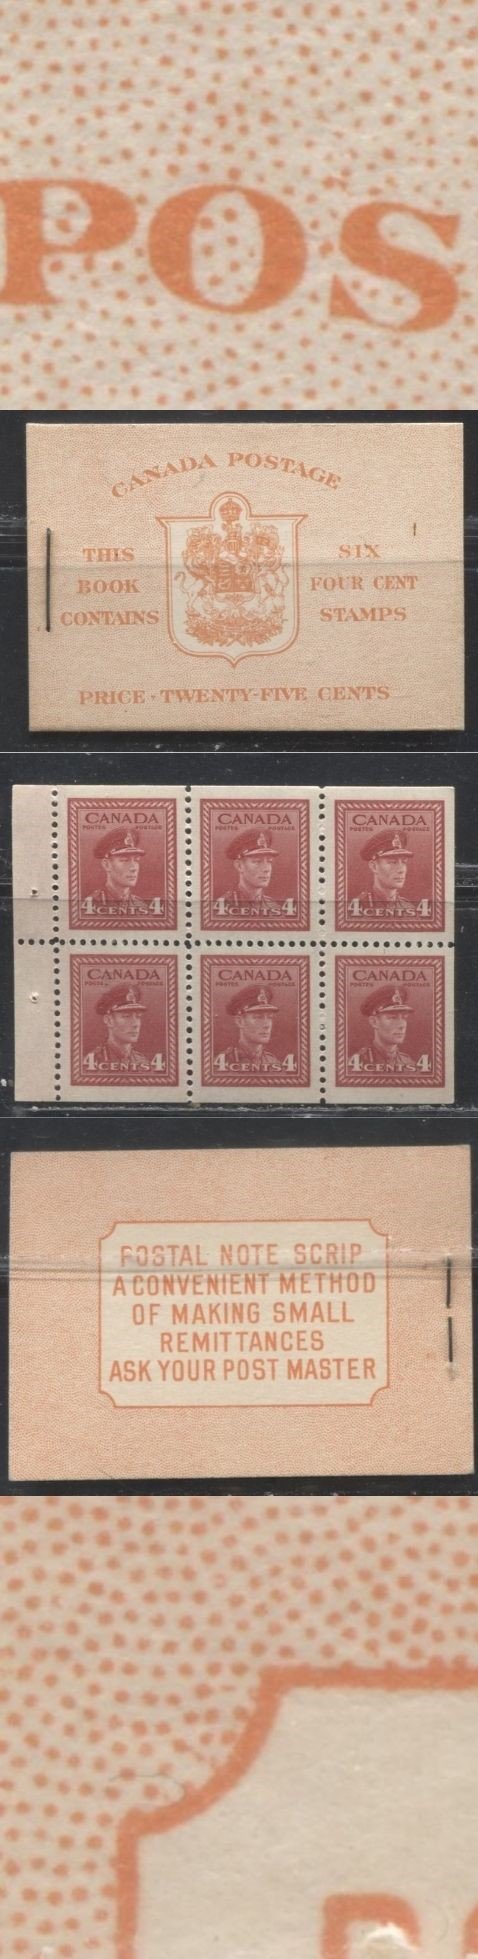 Lot 174 Canada #BK36g 1942-1949 War Issue, Complete 25¢ English Booklet, 1 Pane of 4c Carmine-Red, Vertical Wove Paper, Harris Front Cover IIi, Back Cover Type Cbiv, 7c and 6c Rate Page